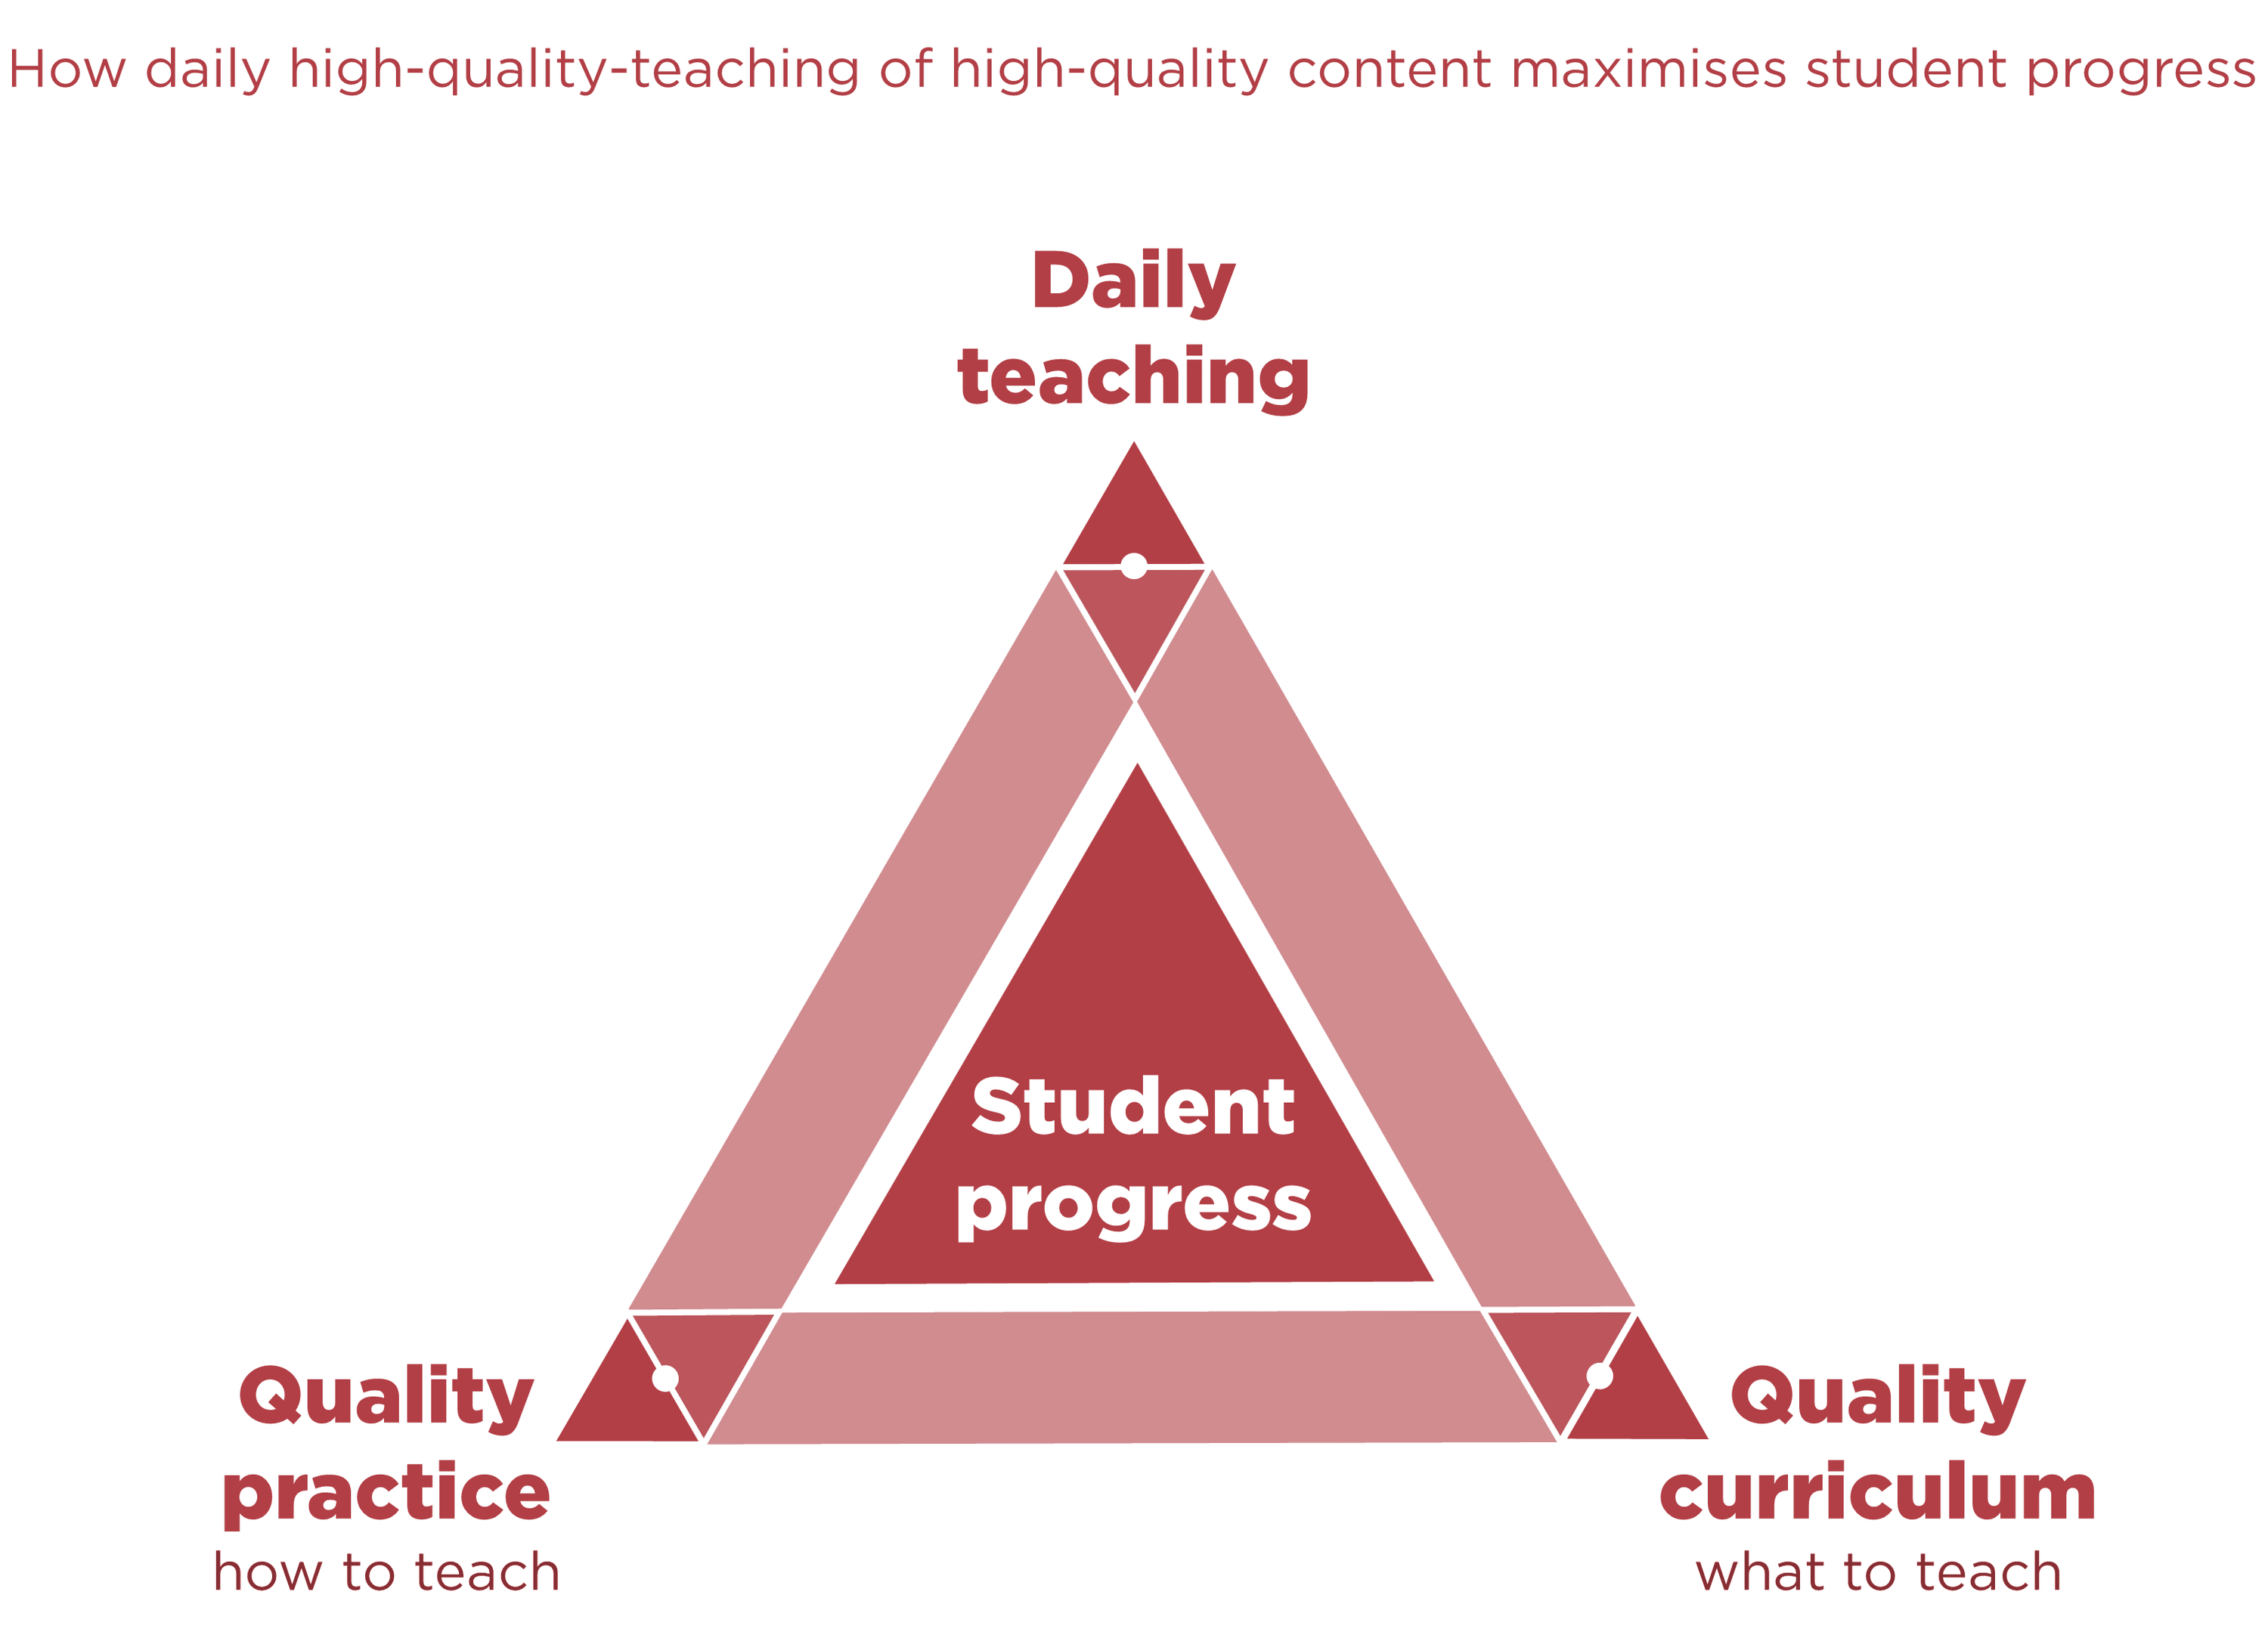 Student progress triangle chart, each corner representing the following groups; daily teaching, quality practice how to teach, and quality curriculum what to teach. 